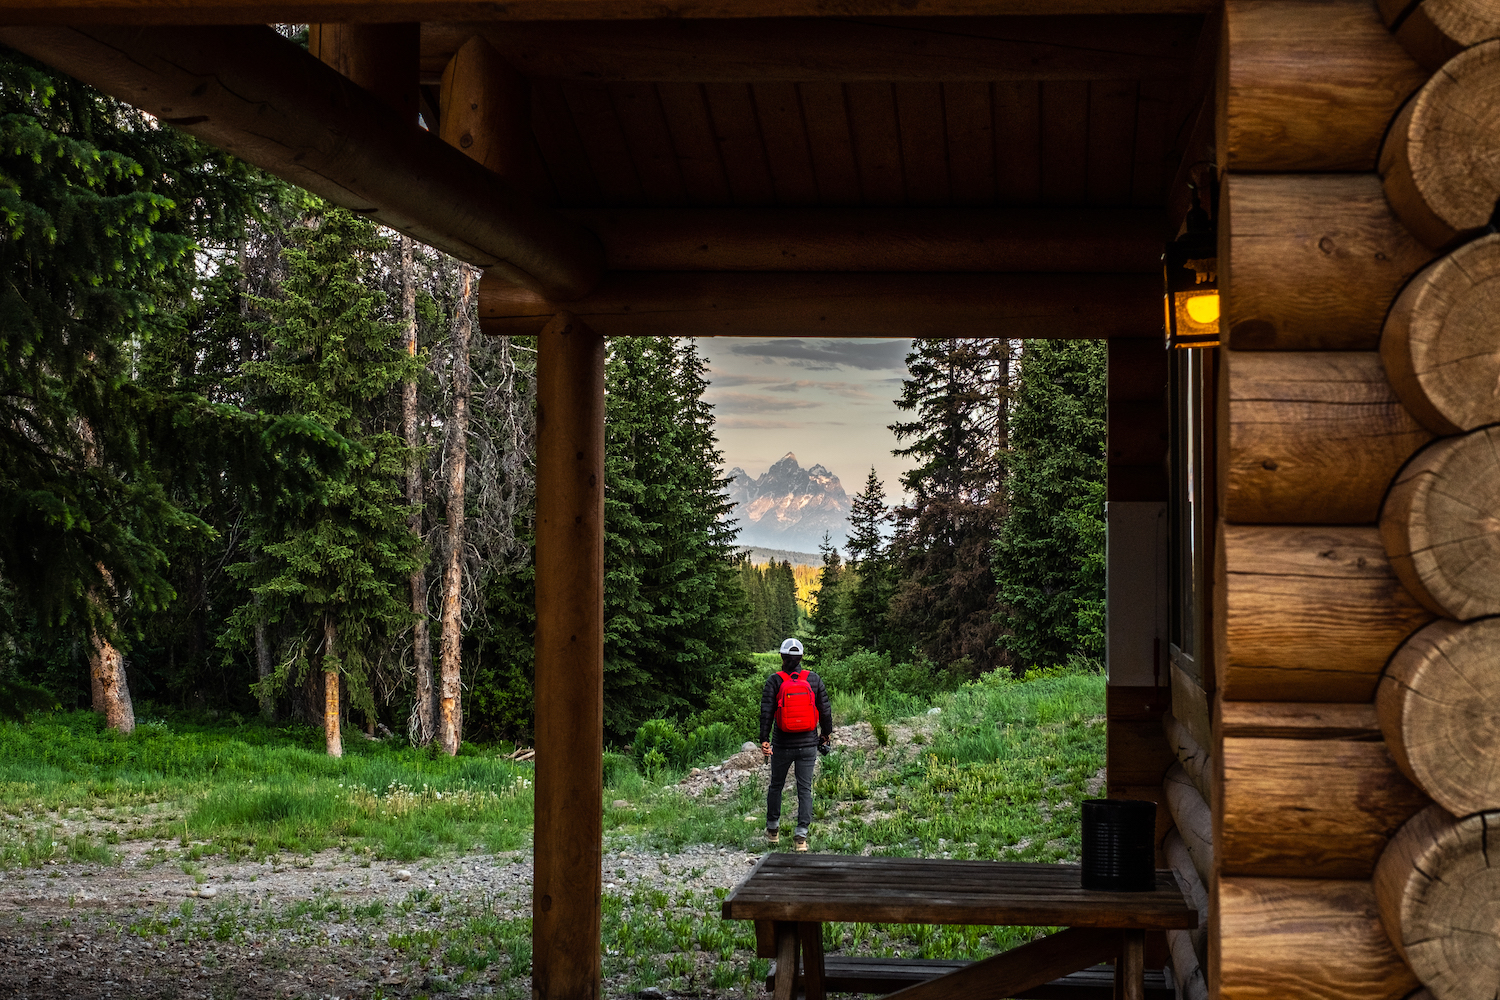 Erin McGrady walks outside the cabin with a camera in hand. The Grand Tetons are in the distance. The cabin and it's wooden slats are in the right hand side of the photo. The porch light on the cabin is on.